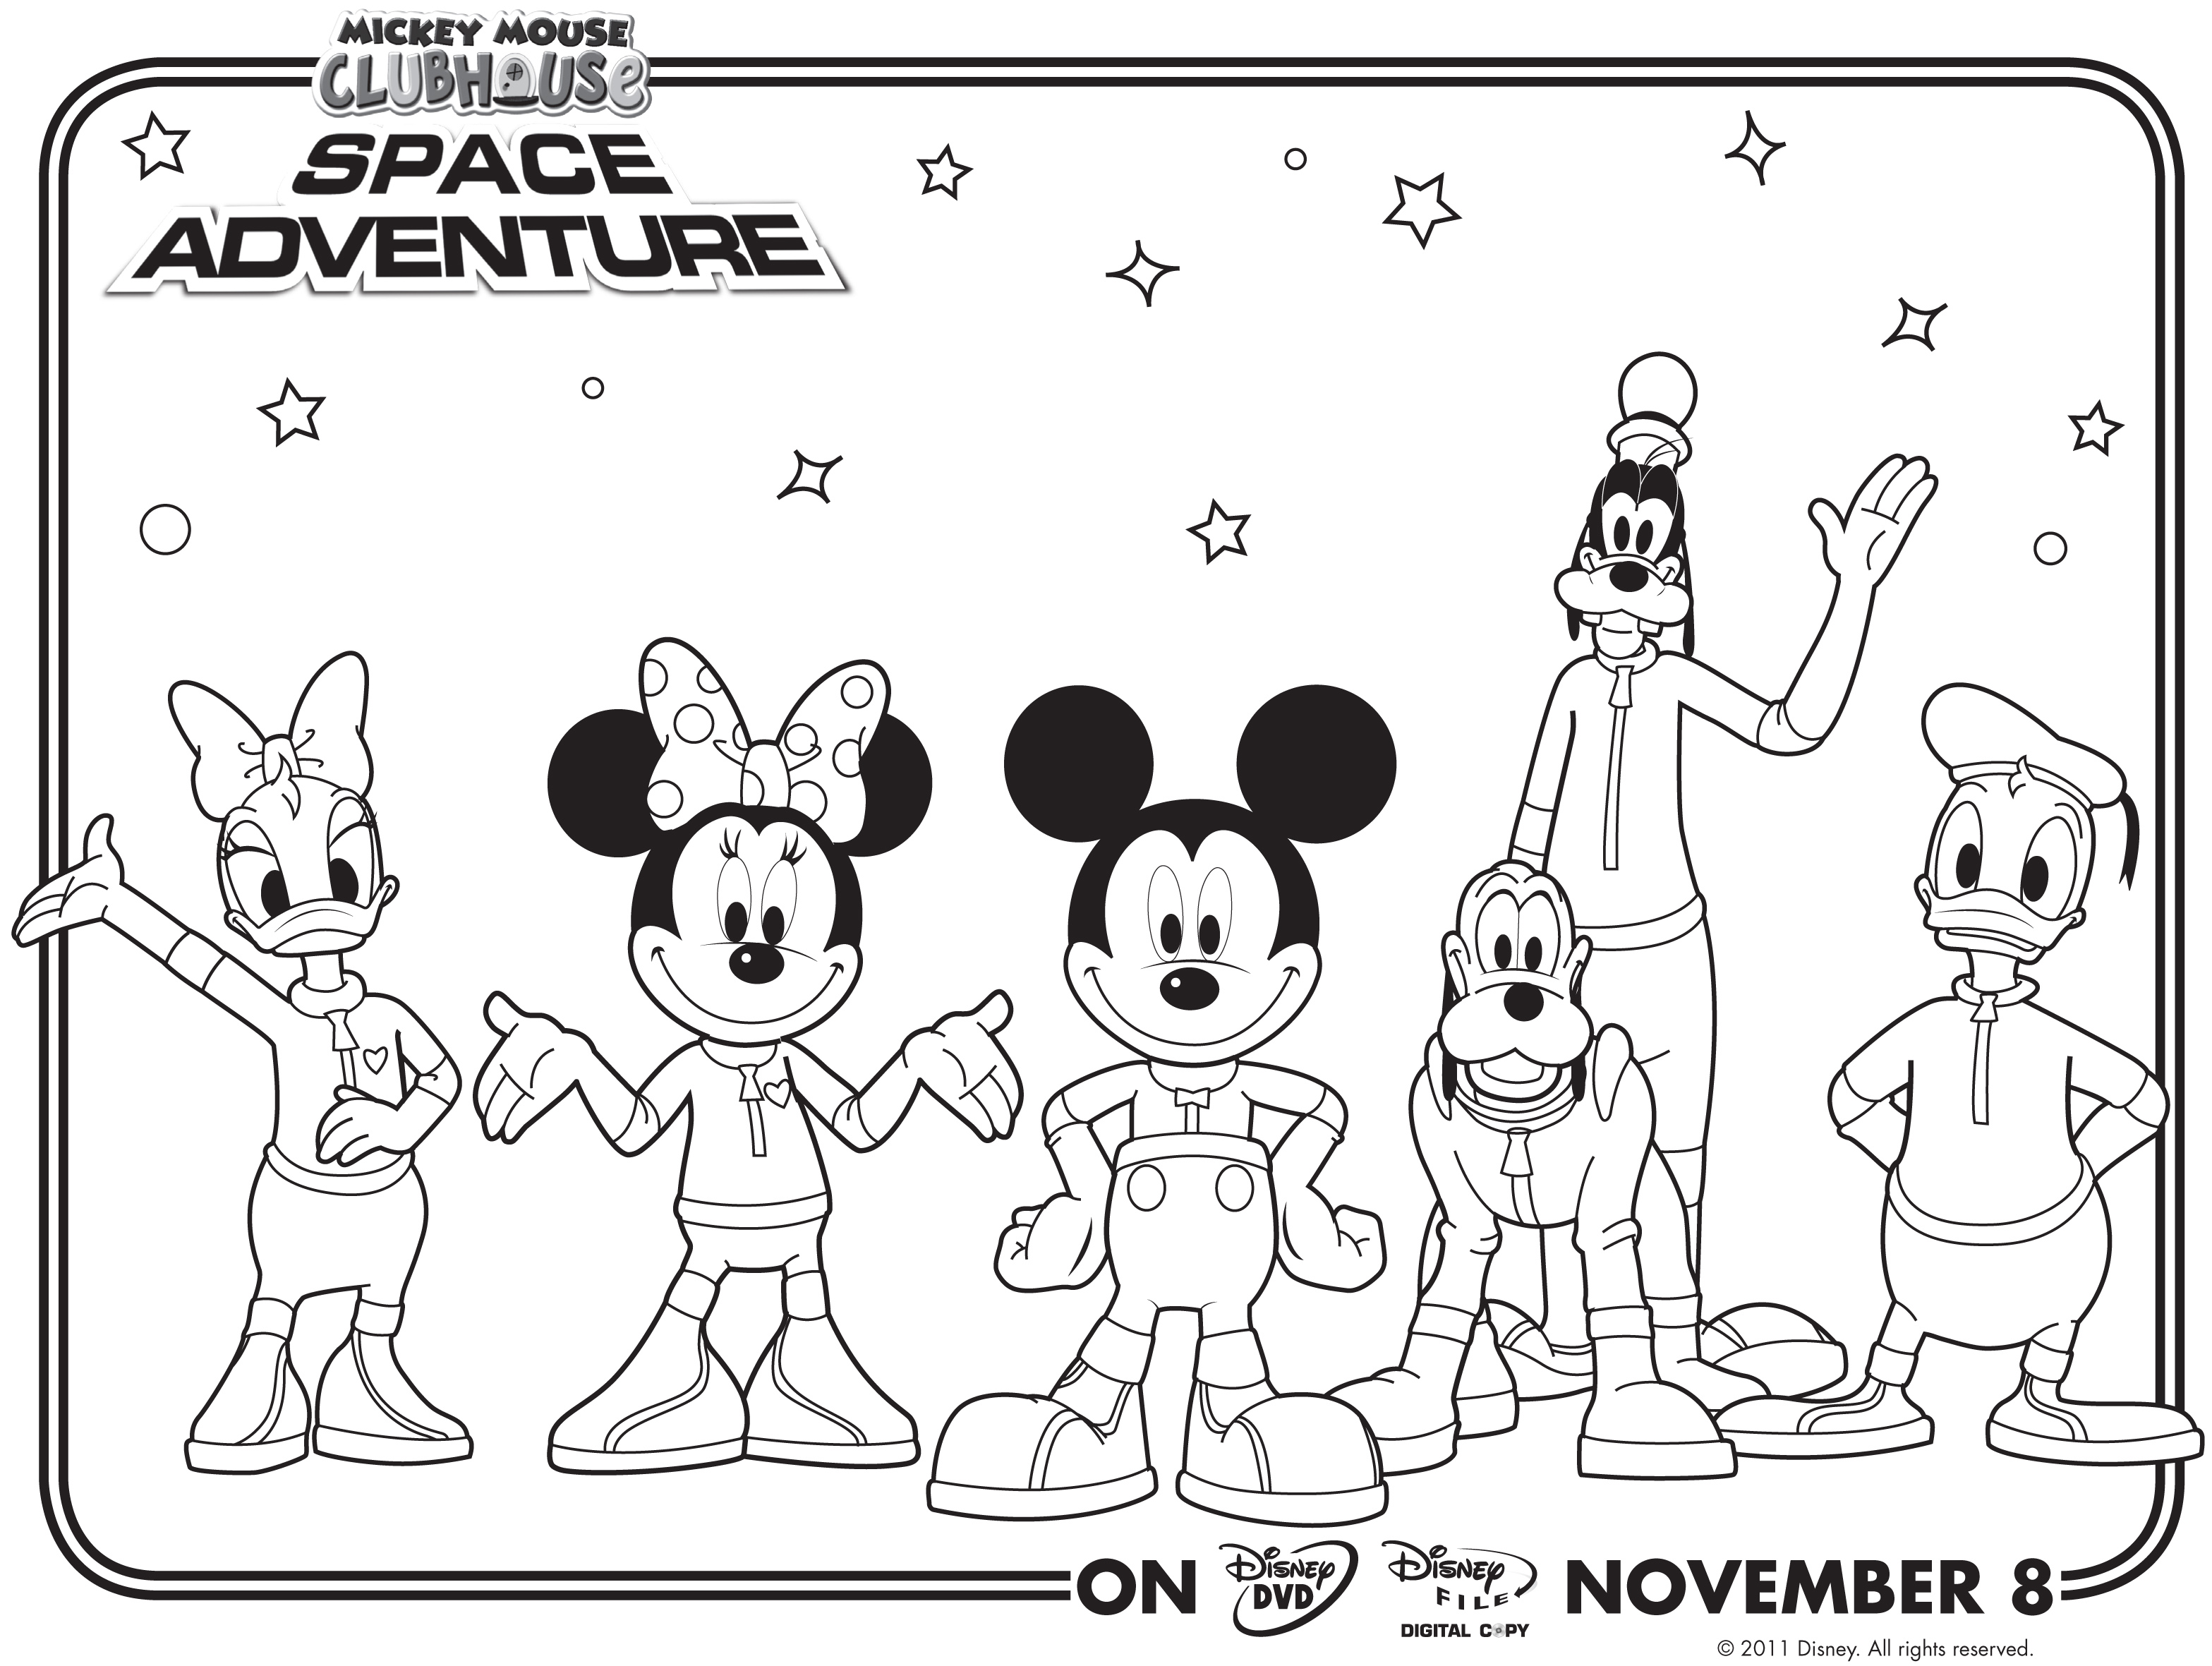 Mickey Mouse Clubhouse Coloring Pages For Kids - Mickey Mouse Space Adventure Coloring Page